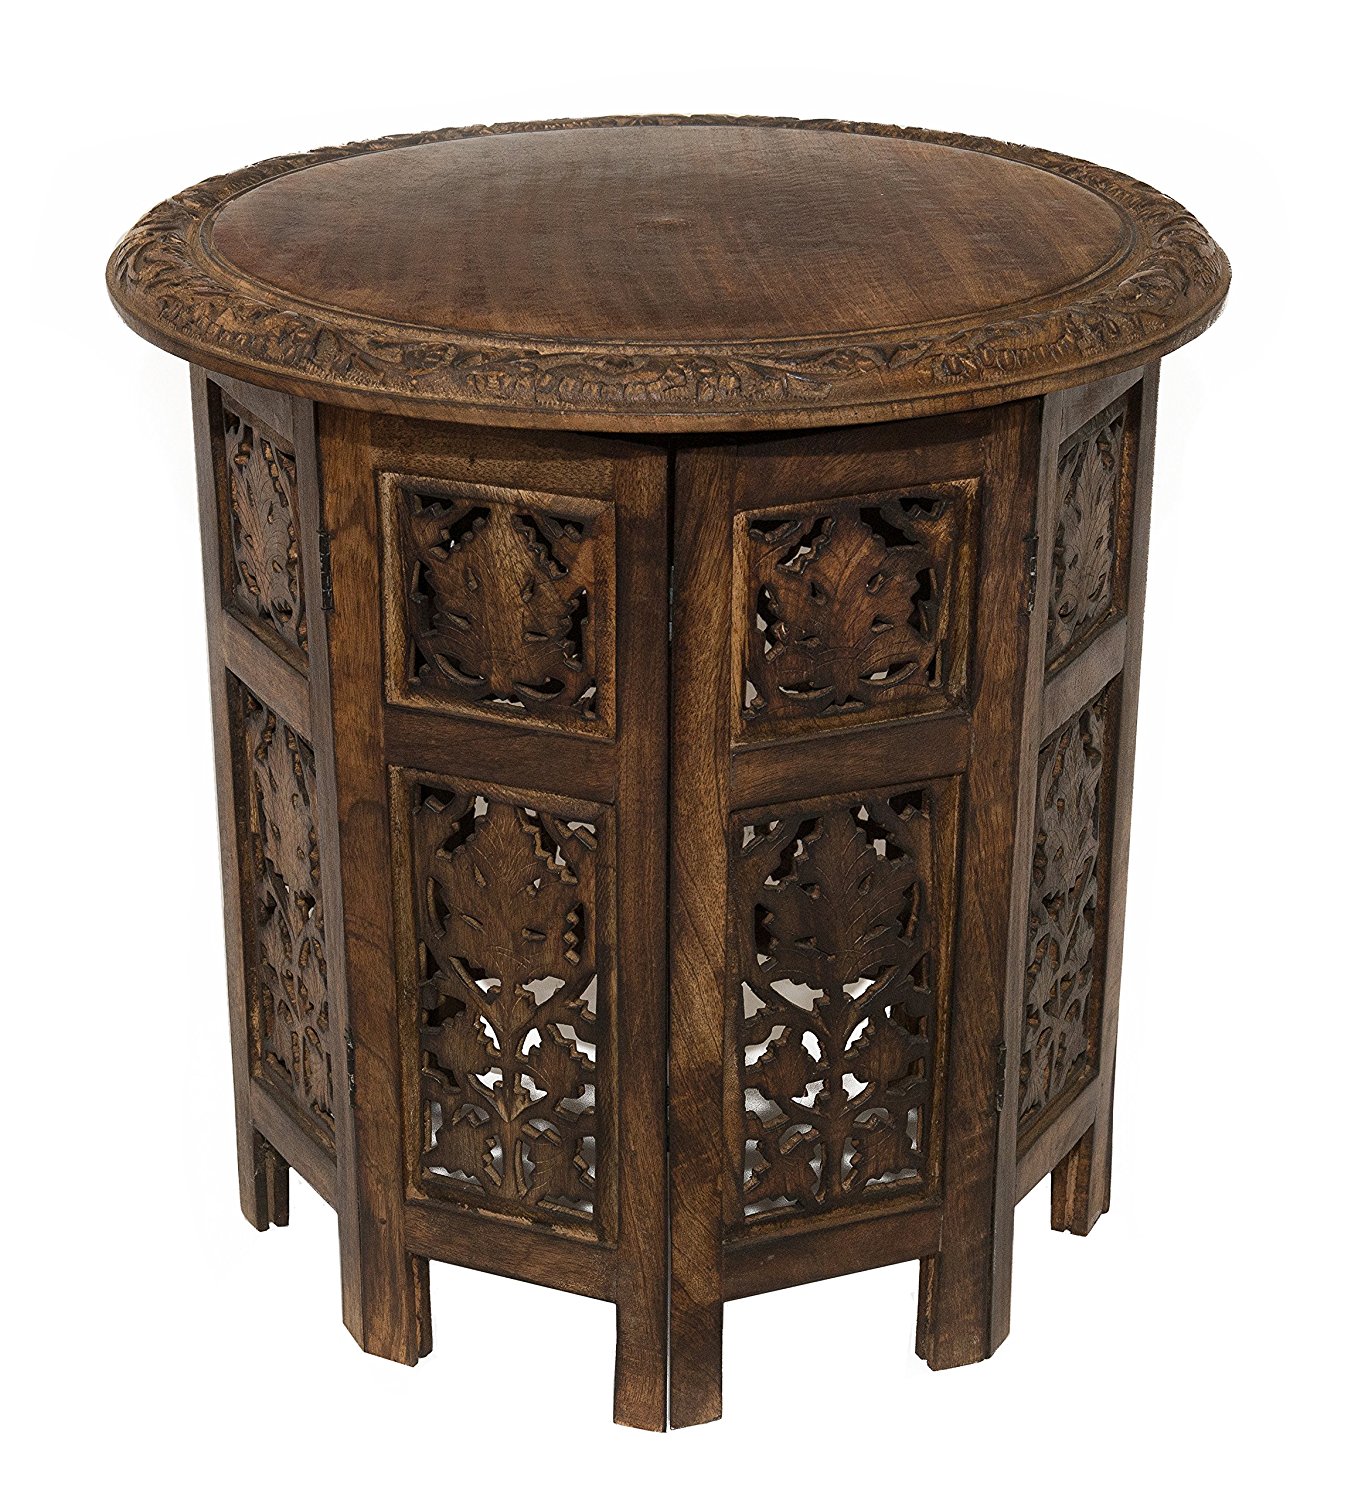 lovely small accent table for ornate with shelves wooden round glass stacking coffee tables white farm breakfast room and chairs narrow outdoor cymbal stand queen bedroom sets